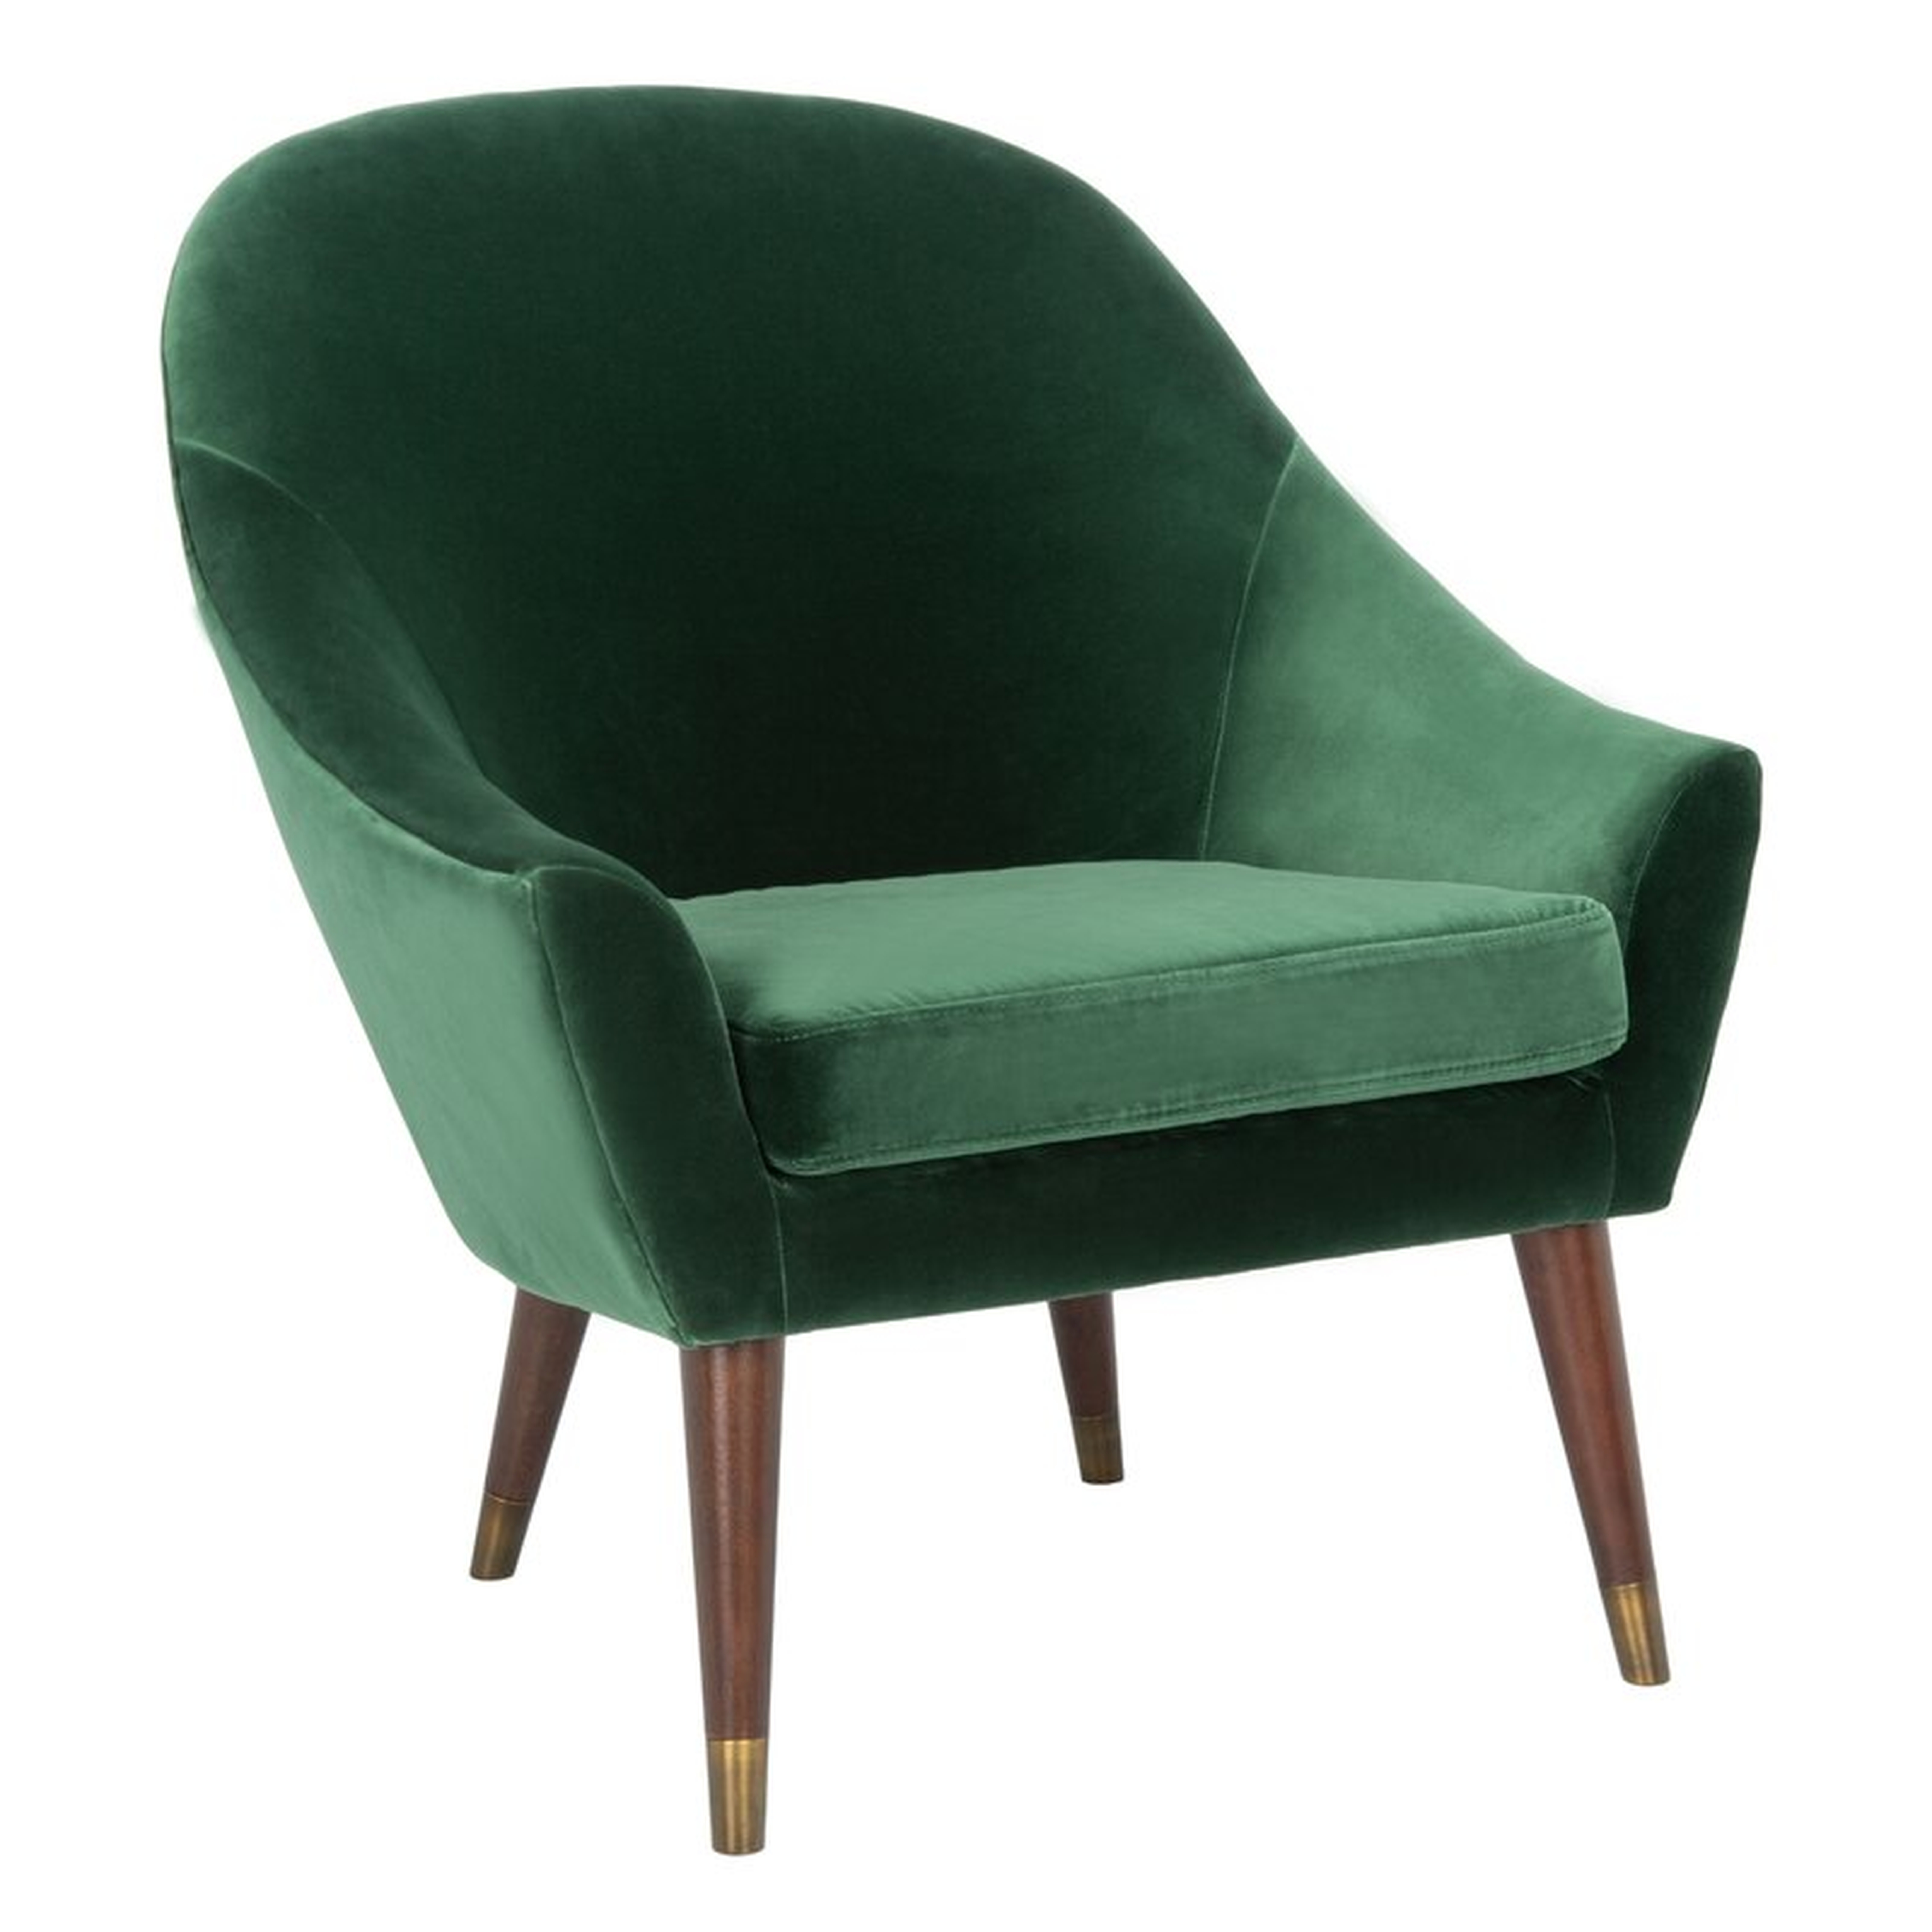 Safavieh Couture Jayana 30.3" W Faux Leather Armchair Fabric: Forest Green - Perigold